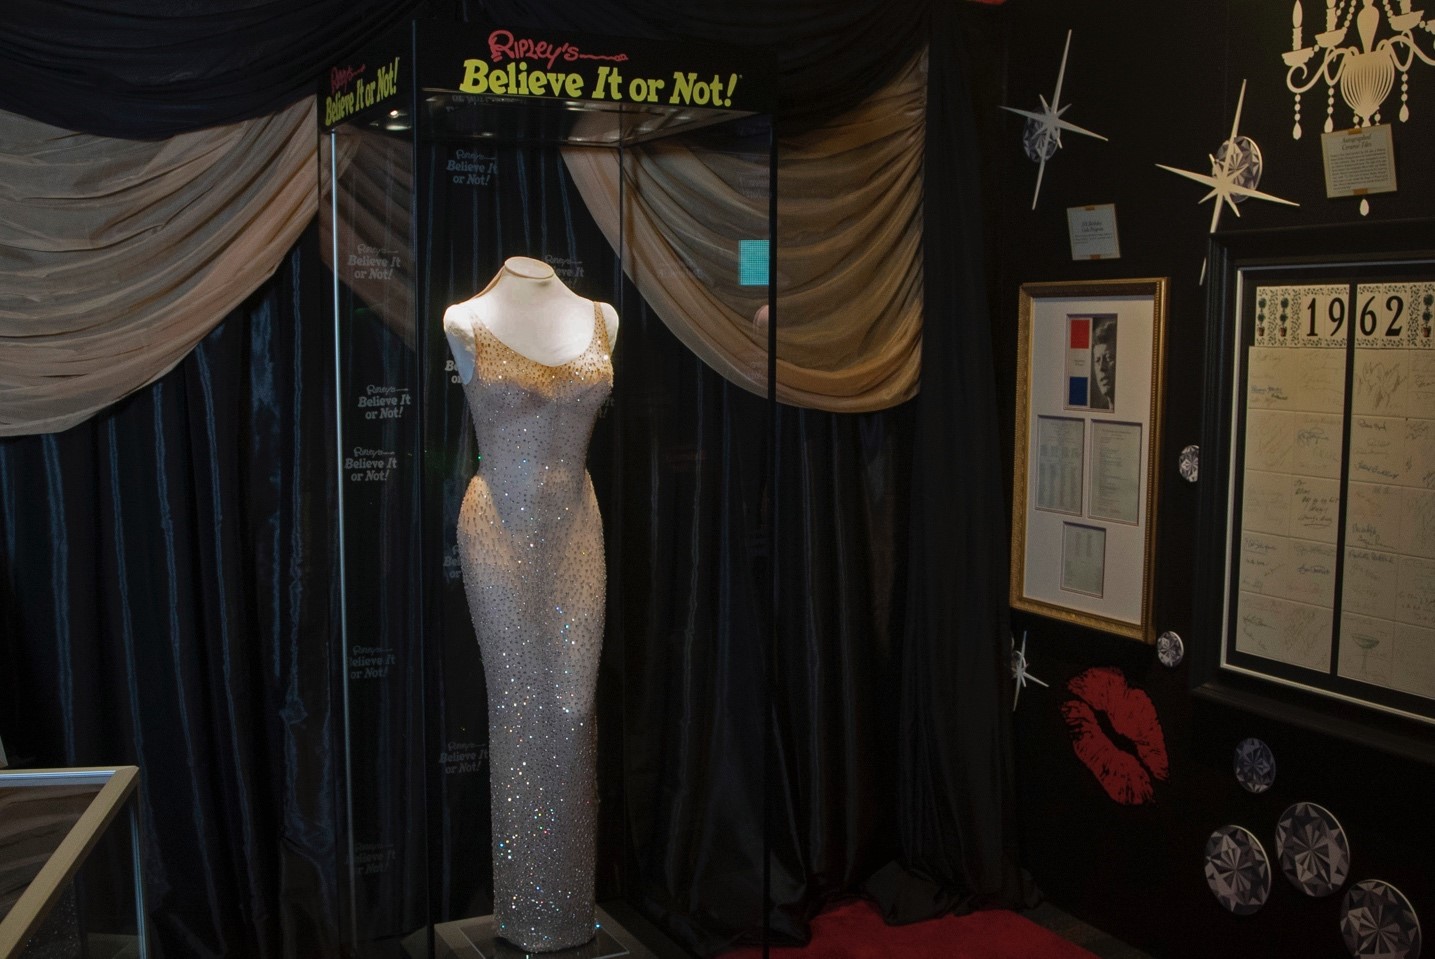 Marilyn Monroe's iconic dress holds the Guinness World Records record for the most expensive dress ever sold at auction after it was acquired by Ripley's for $4.8 million